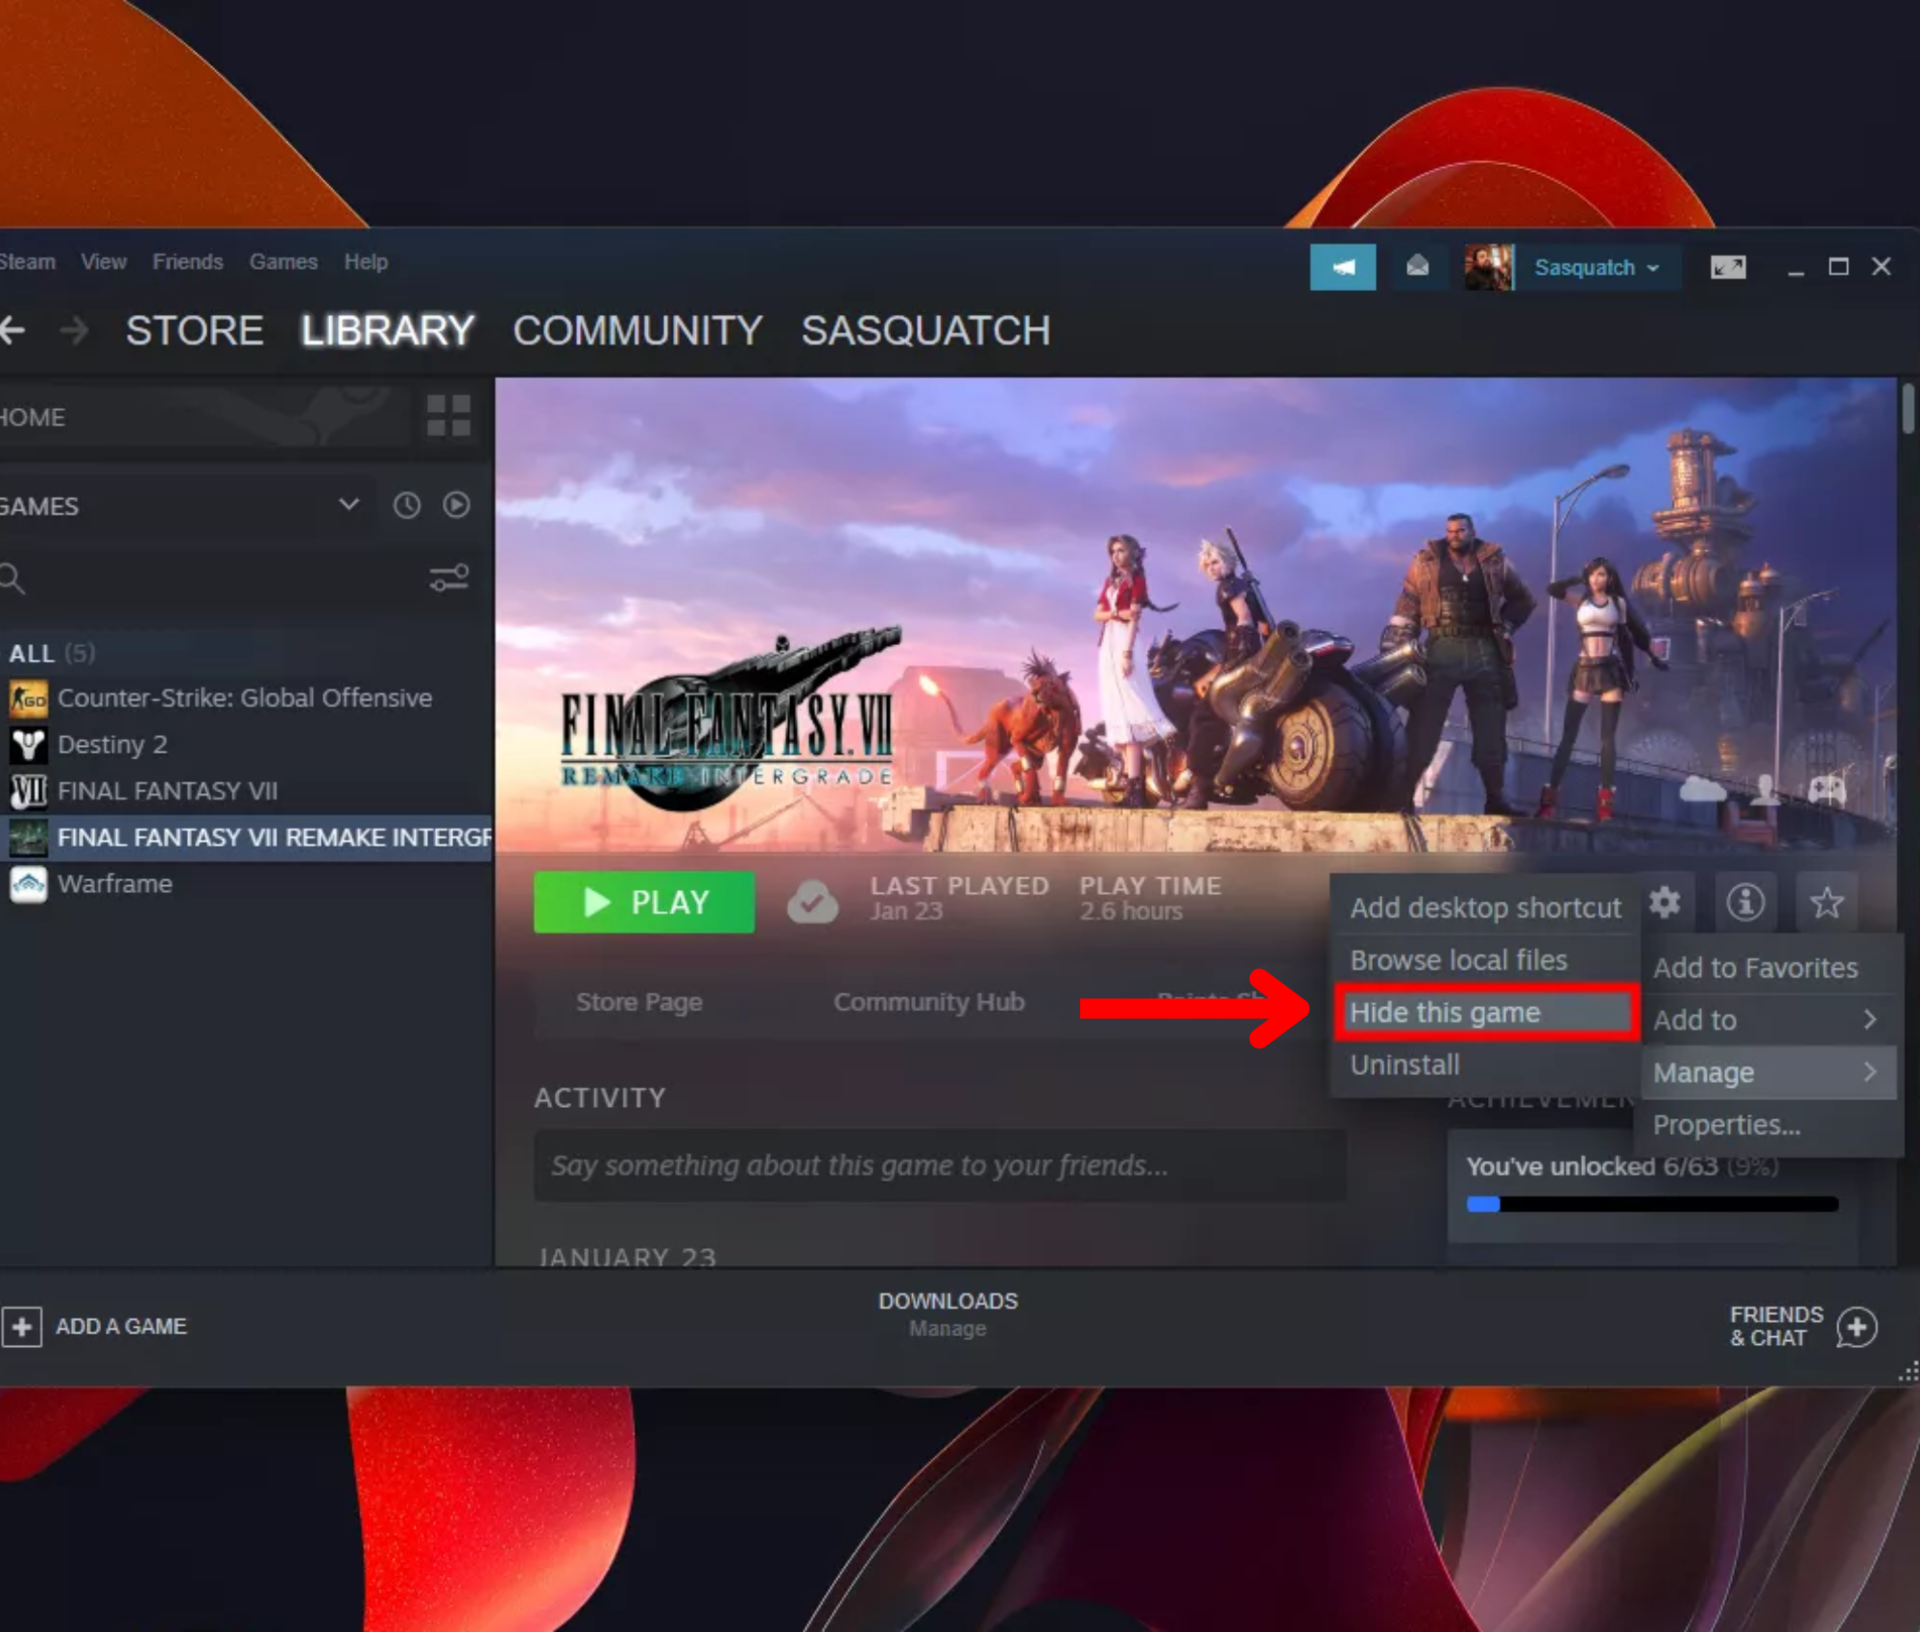 How to redeem any Steam code you might get - Android Authority